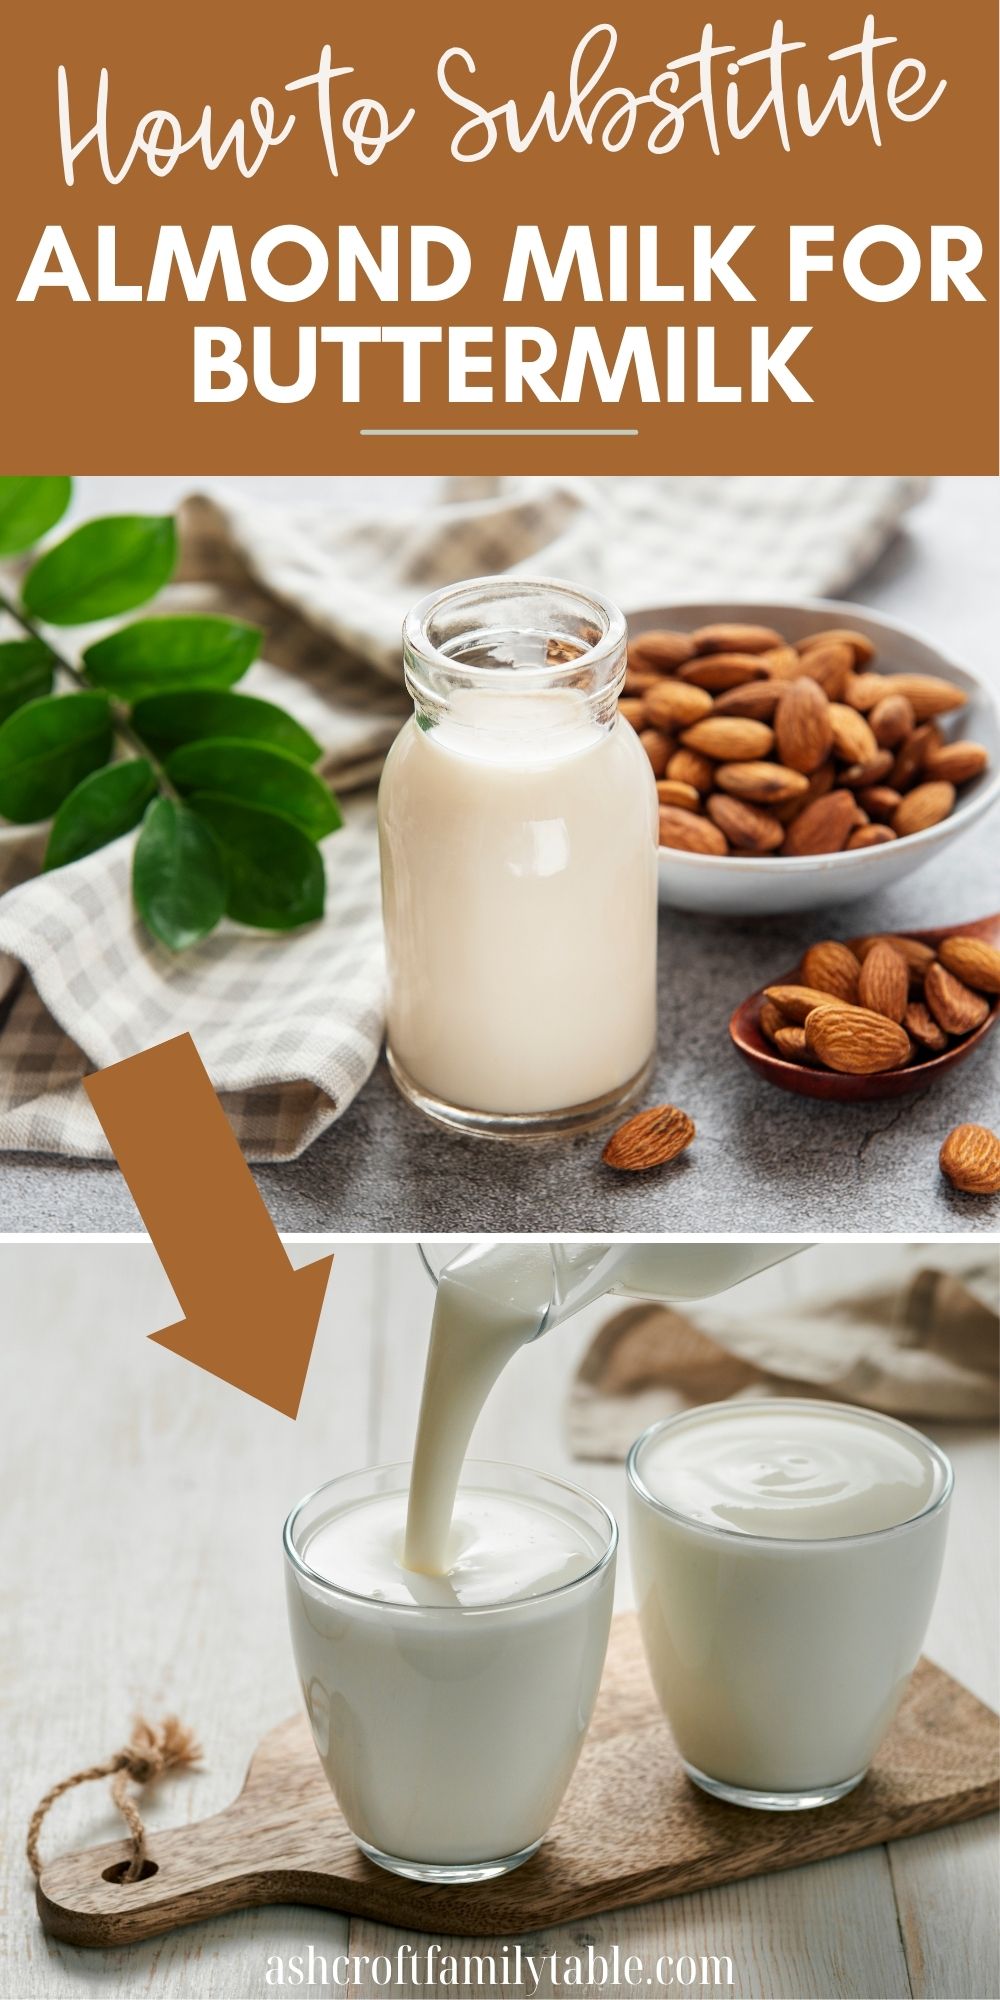 Pinterest graphic with text and a collage of almond milk and buttermilk.